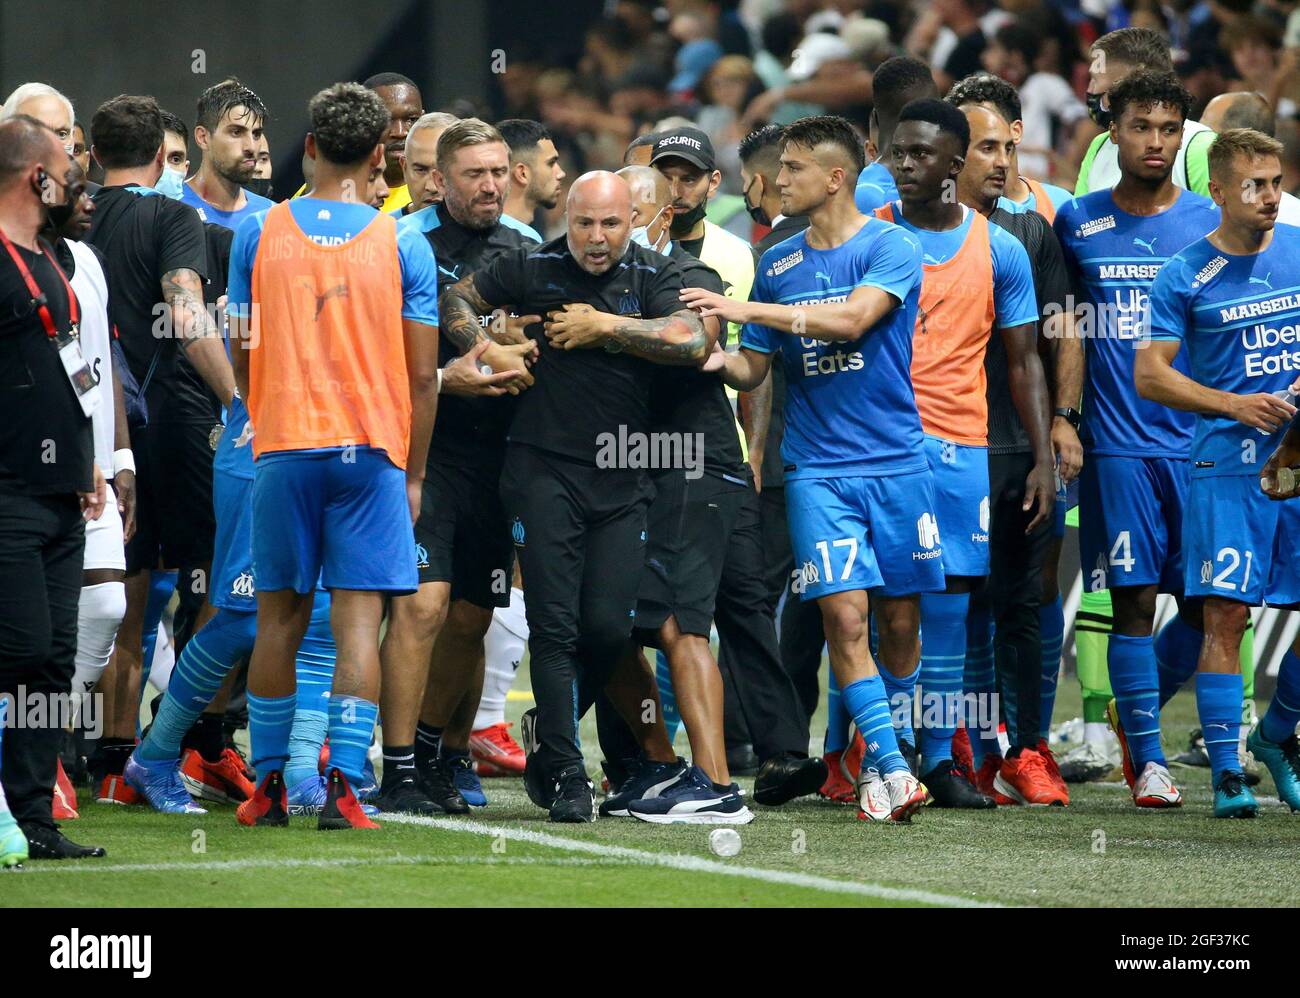 firo: 22.08.2021, football, soccer, LIGUE 1, season 2021/2022, 21/22 French league, OGC Nice (OGCN) - Olympique de Marseille (OM) Incidents between players of Marseille - here coach of Marseille Jorge Sampaoli being pushed back by his staff and his players - and supporters of OGC Nice who enter the pitch chaos, space storm of the Nice fans, throwing attacks of the Nice fans versus players from Marseille who throw back Our terms and conditions apply, available at www.firosportphoto.de , Â¬¬ ONLY FOR USE IN GERMANY !!!!!! Photo: DPPI, copyright by firo sportphoto: Coesfelder Str. 207 D-48249 DvÂ Stock Photo